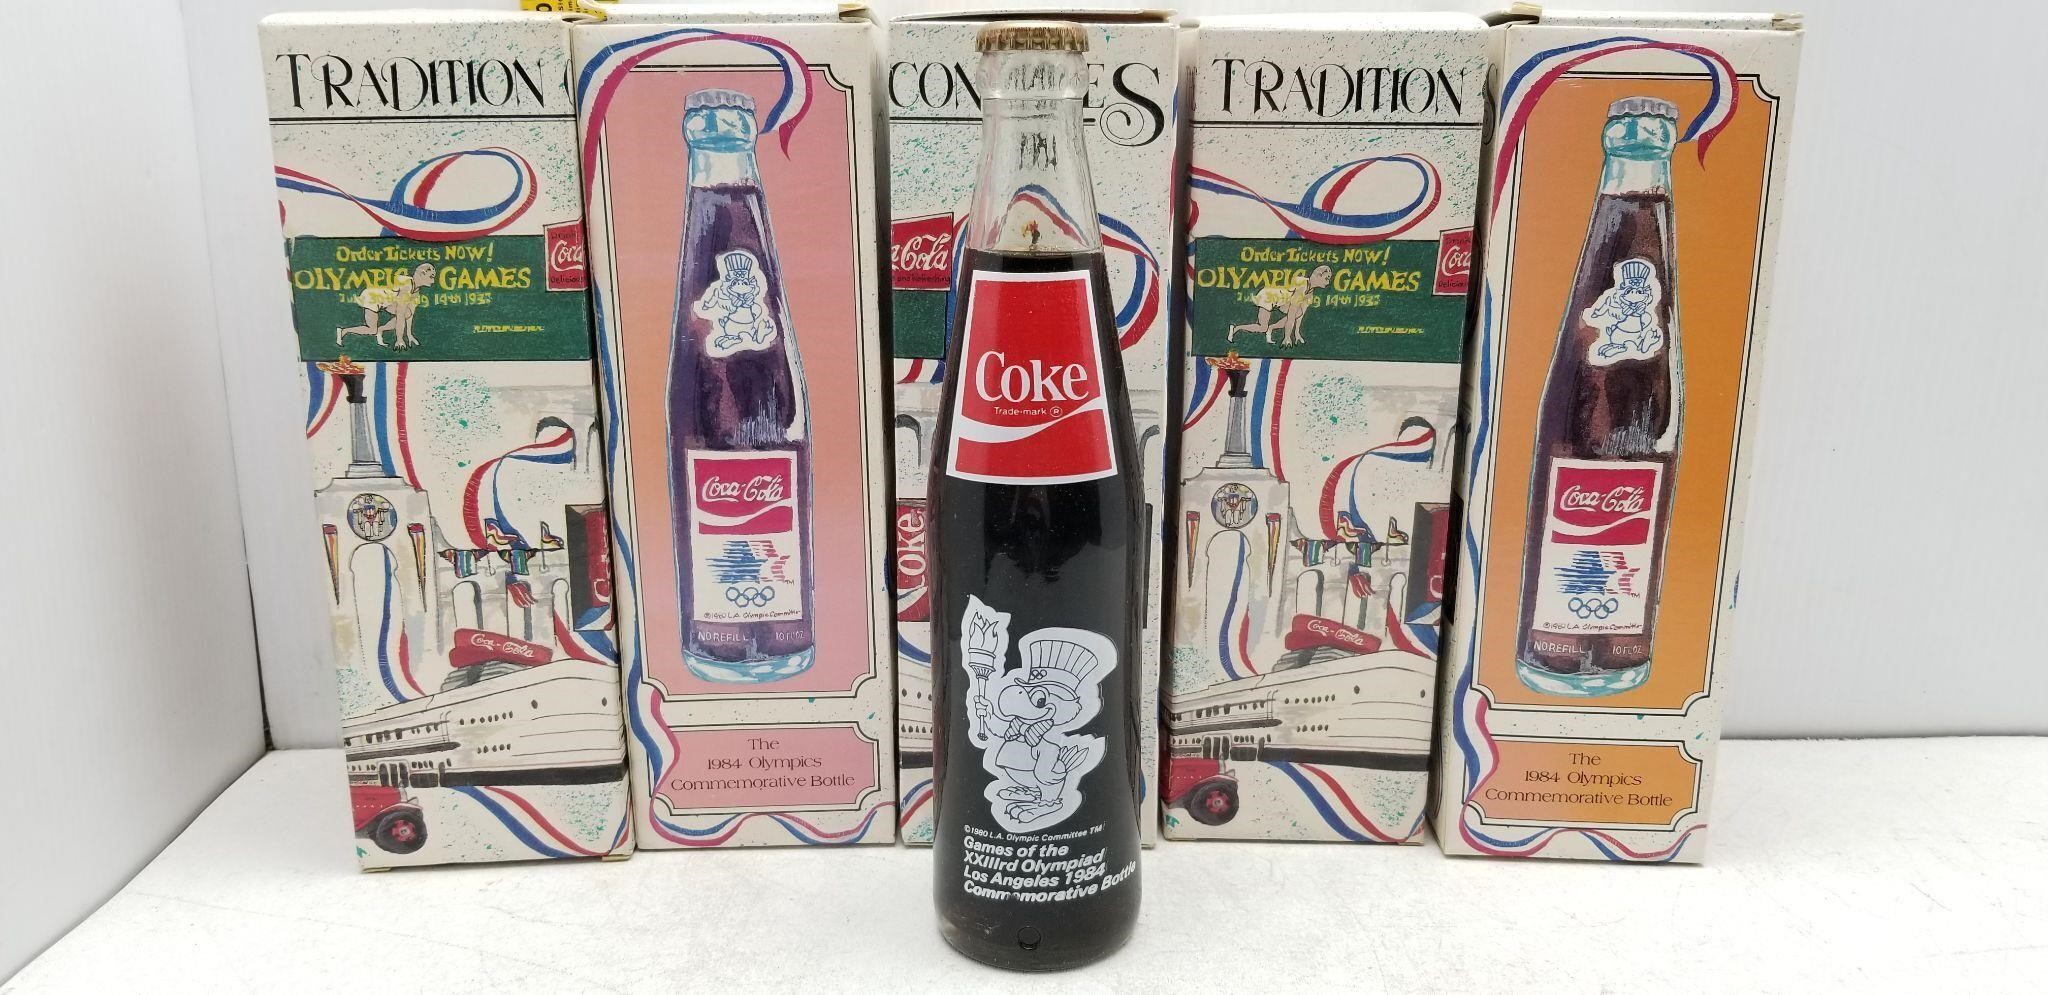 5 COCA COLA 1984 OLYMPIC GAMES BOTTLES IN BOXES